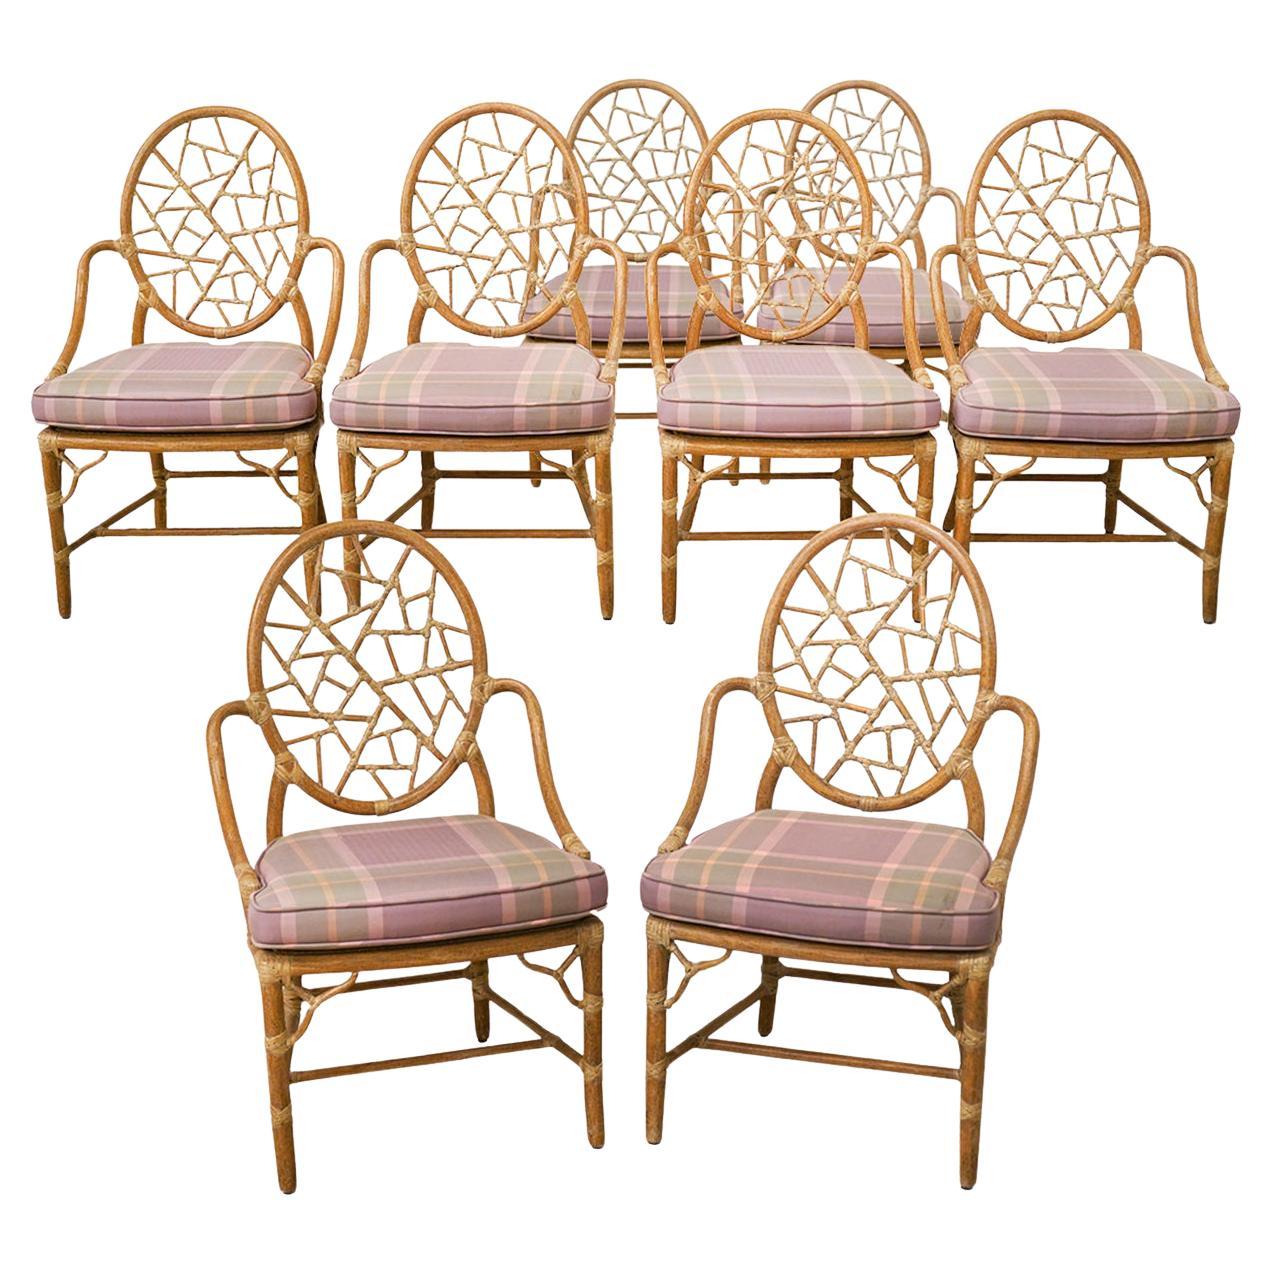 Set of 8 Original McGuire “Cracked Ice” Arm Chairs